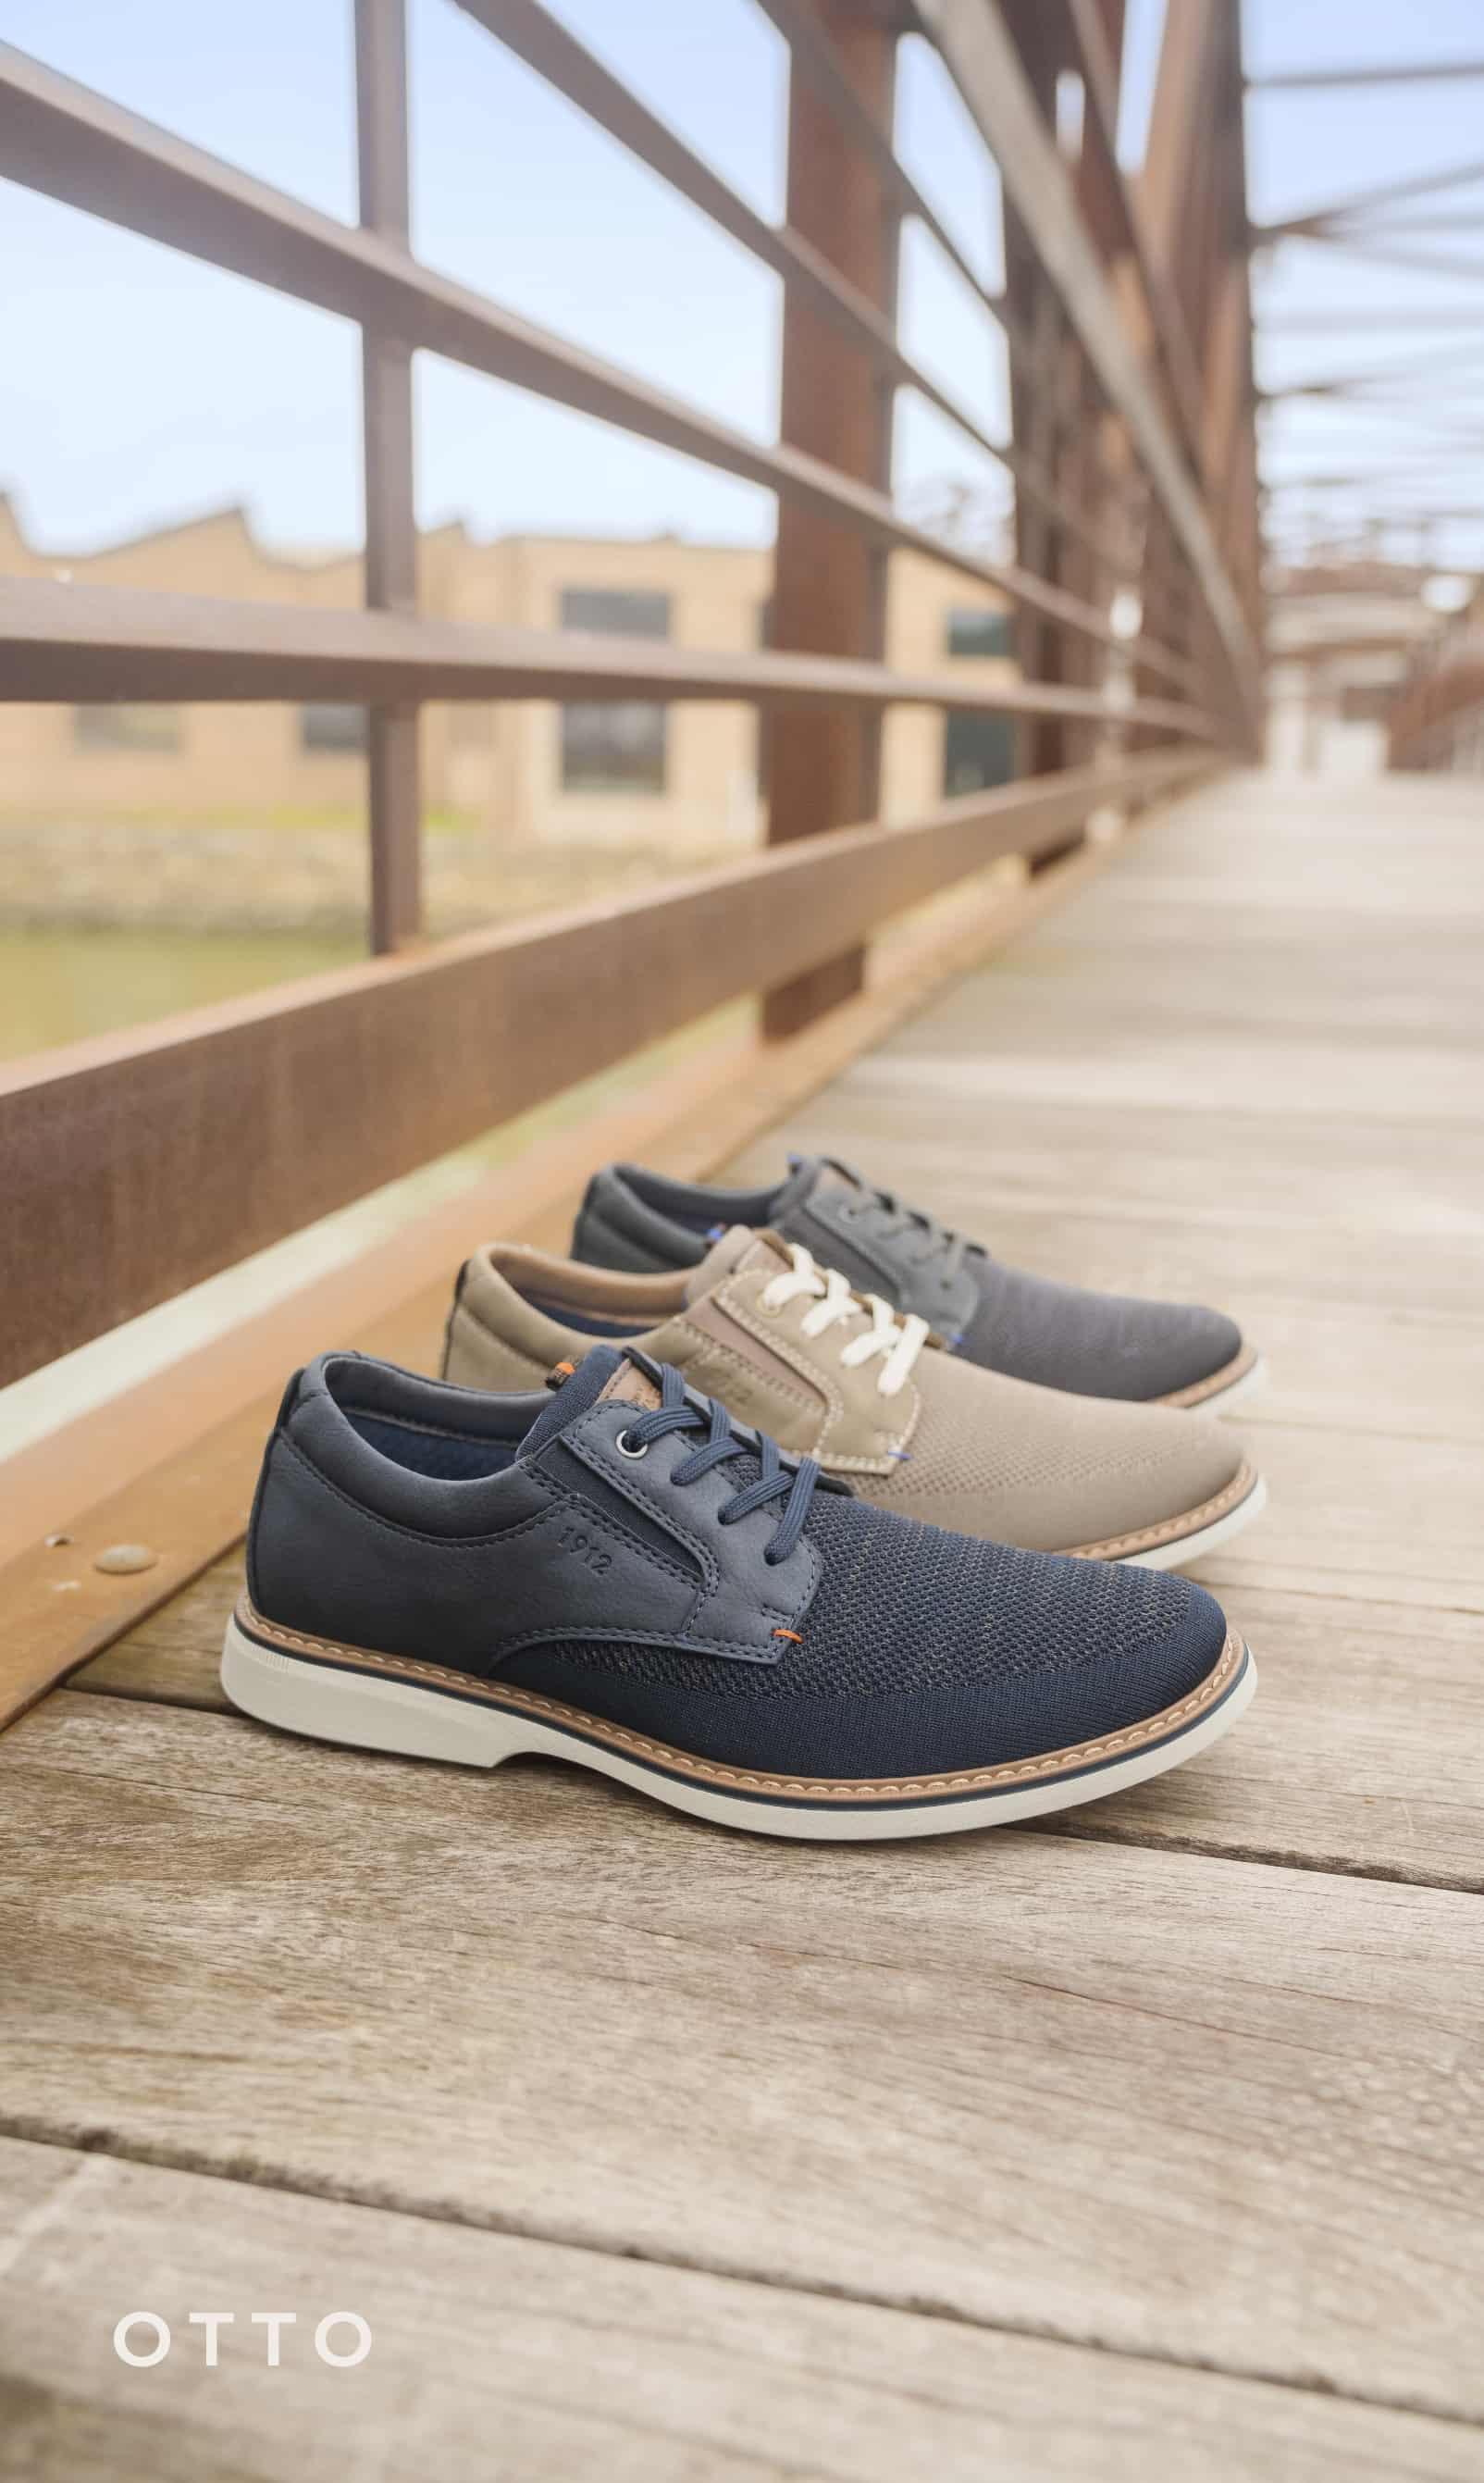 Men's Newest Shoes category. Image features the Otto knit in 3 colors.